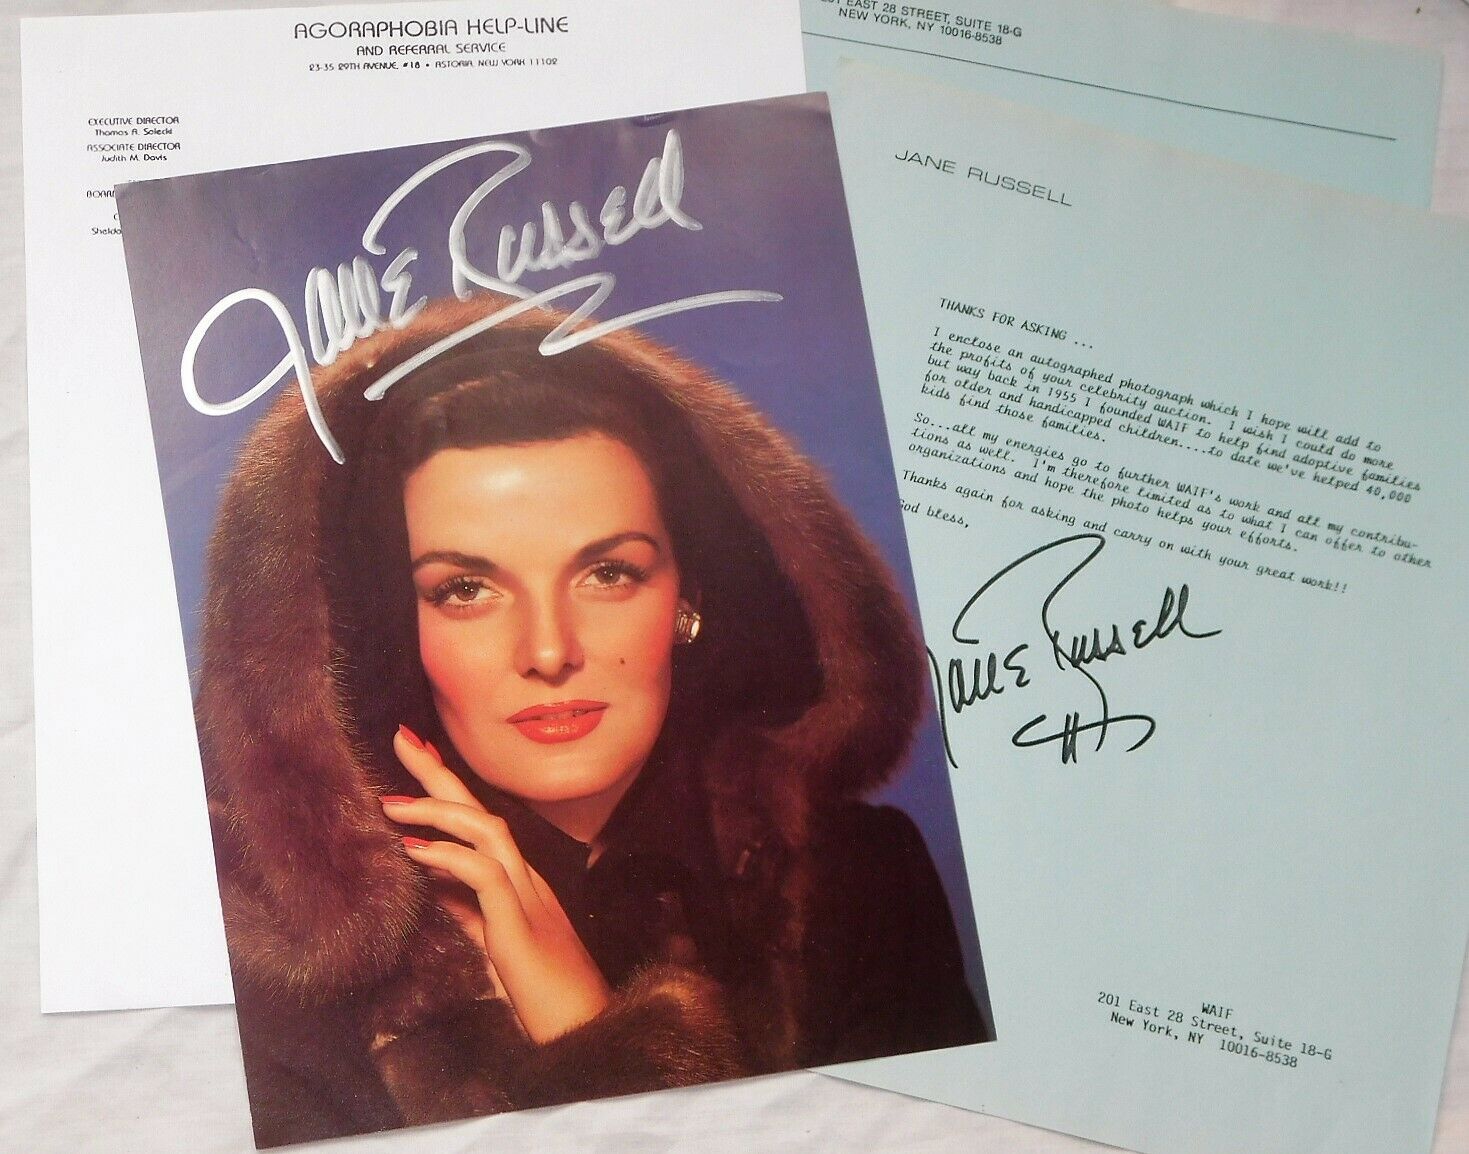 Jane Russell Signed Photograph Personal Letter Charity Auction 1995 Waif